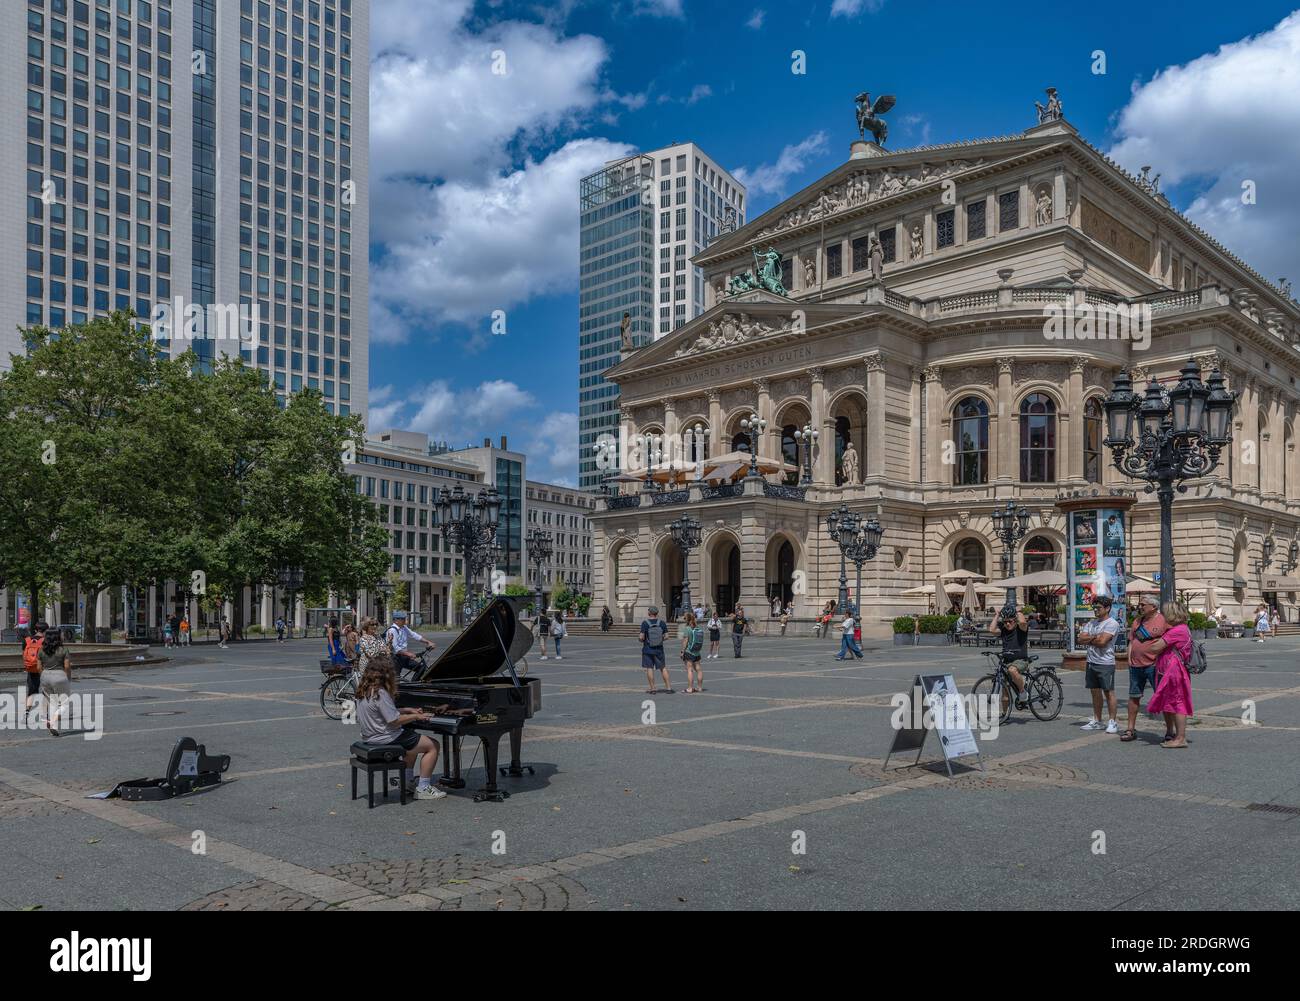 Young piano player in front of the Alte Oper, Frankfurt, Germany Stock Photo